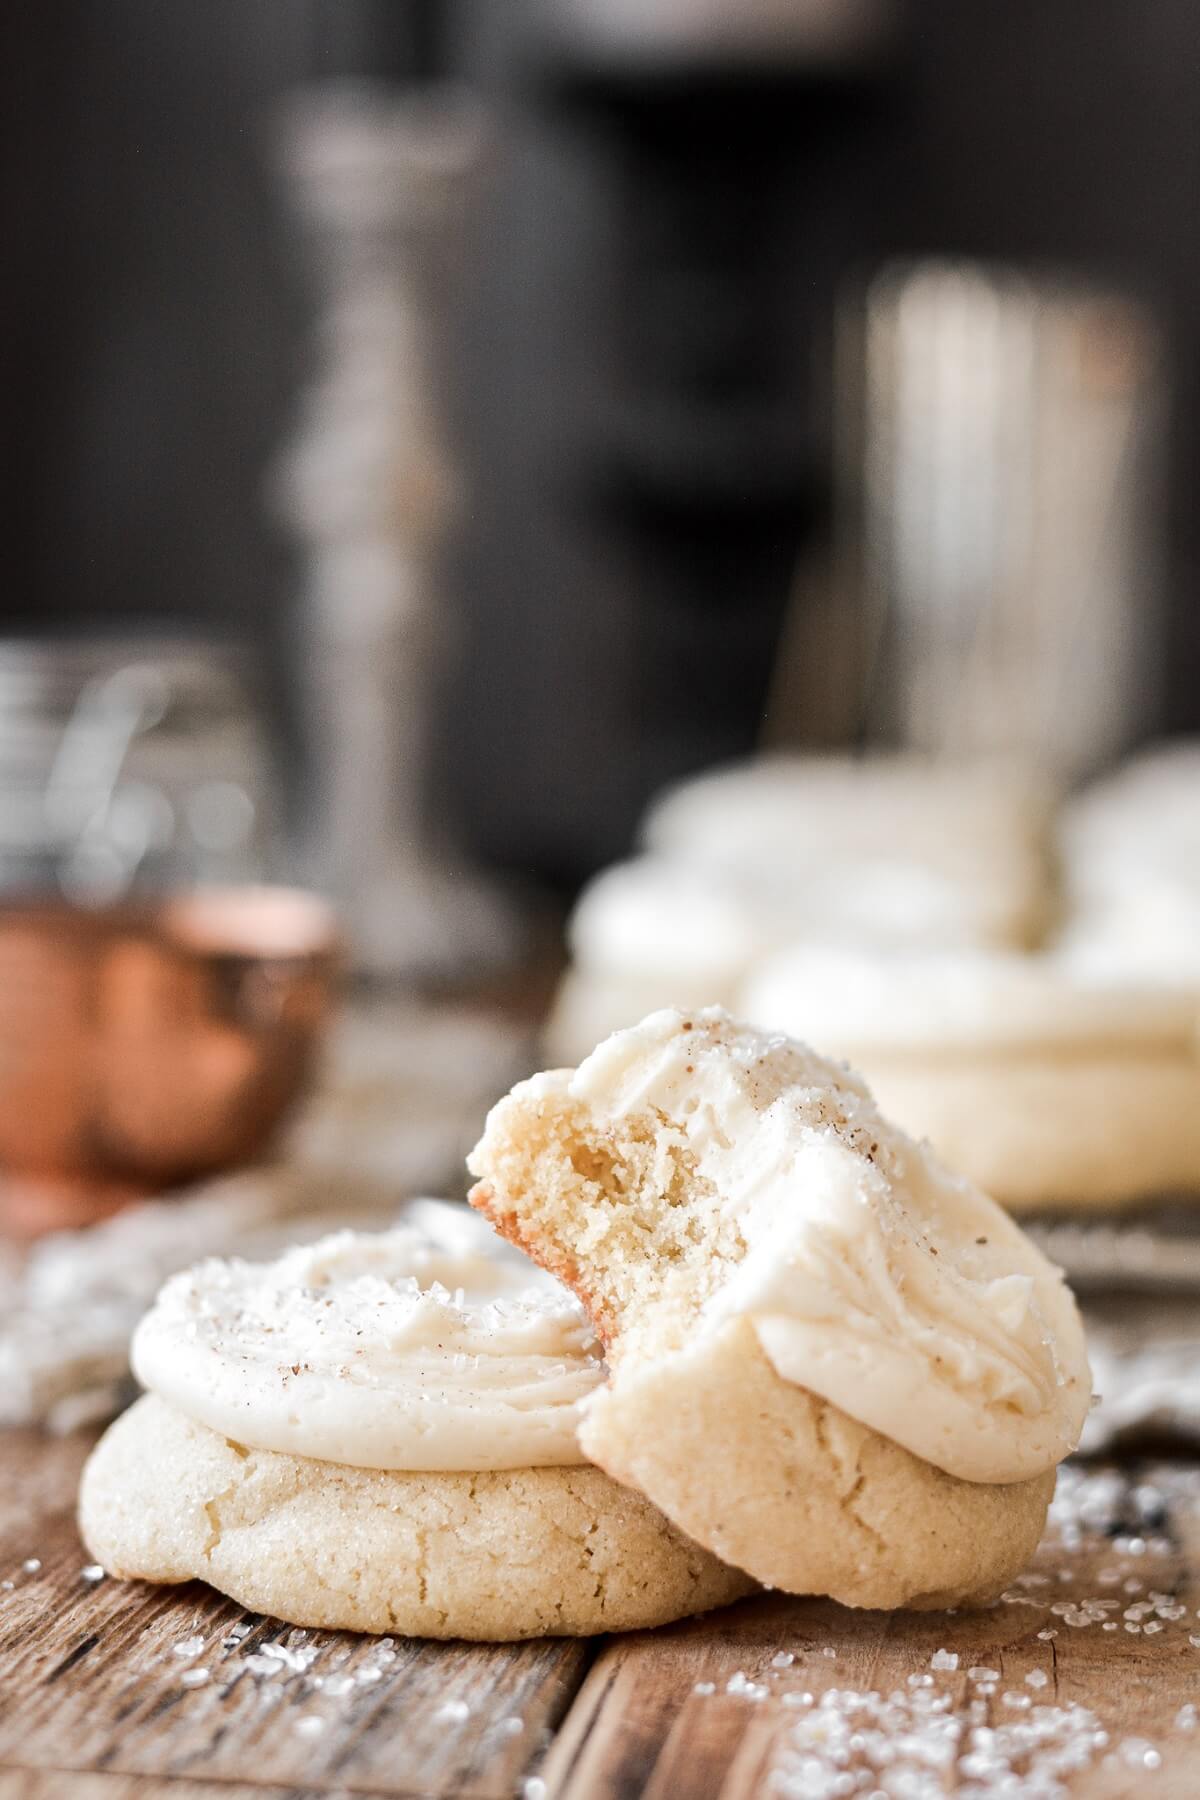 Eggnog cookies with eggnog frosting, one with a bite taken.